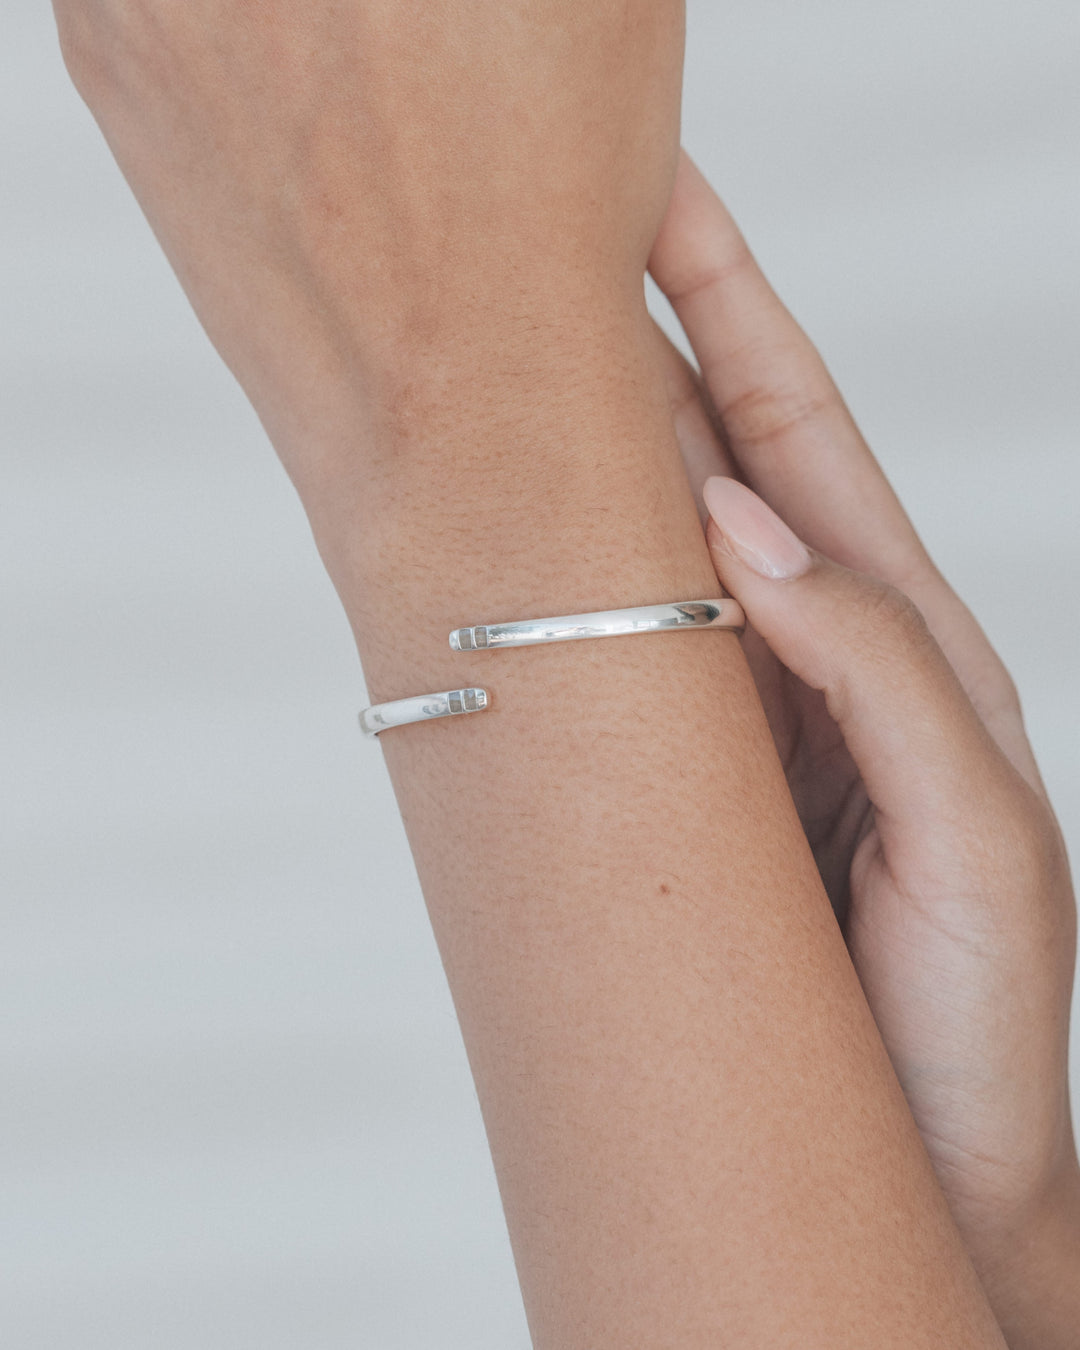 A photo of a woman holding up her wrist against a white background to show the sterling silver bypass hinged cuff bracelet